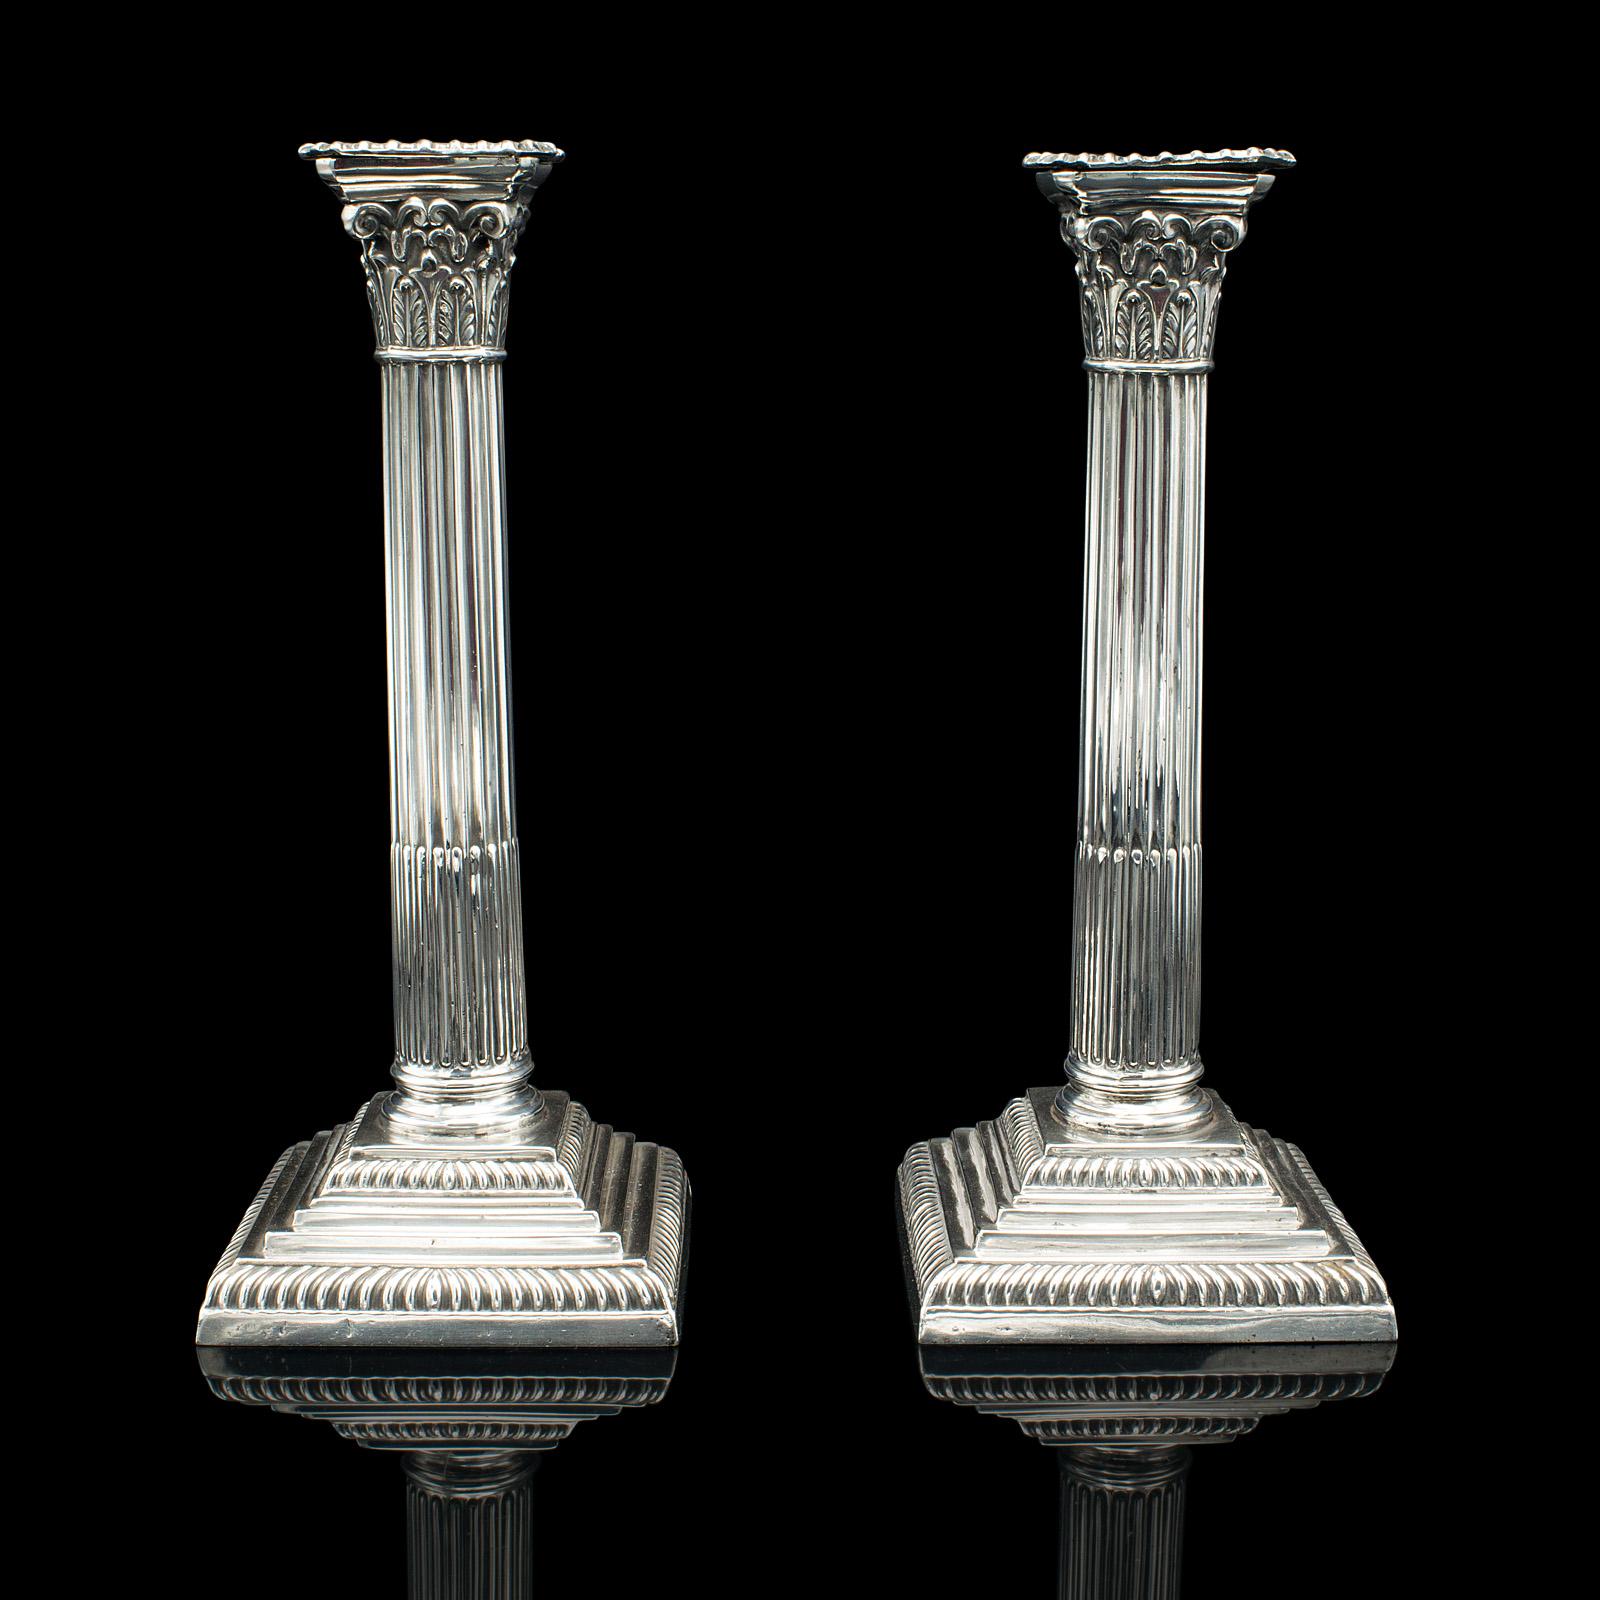 This is a pair of antique decorative candlesticks. An English, silver plated candle stand in classical taste, dating to the late Victorian period, circa 1900.

Delightful candle stands with a traditional aesthetic
Displaying a desirable aged patina